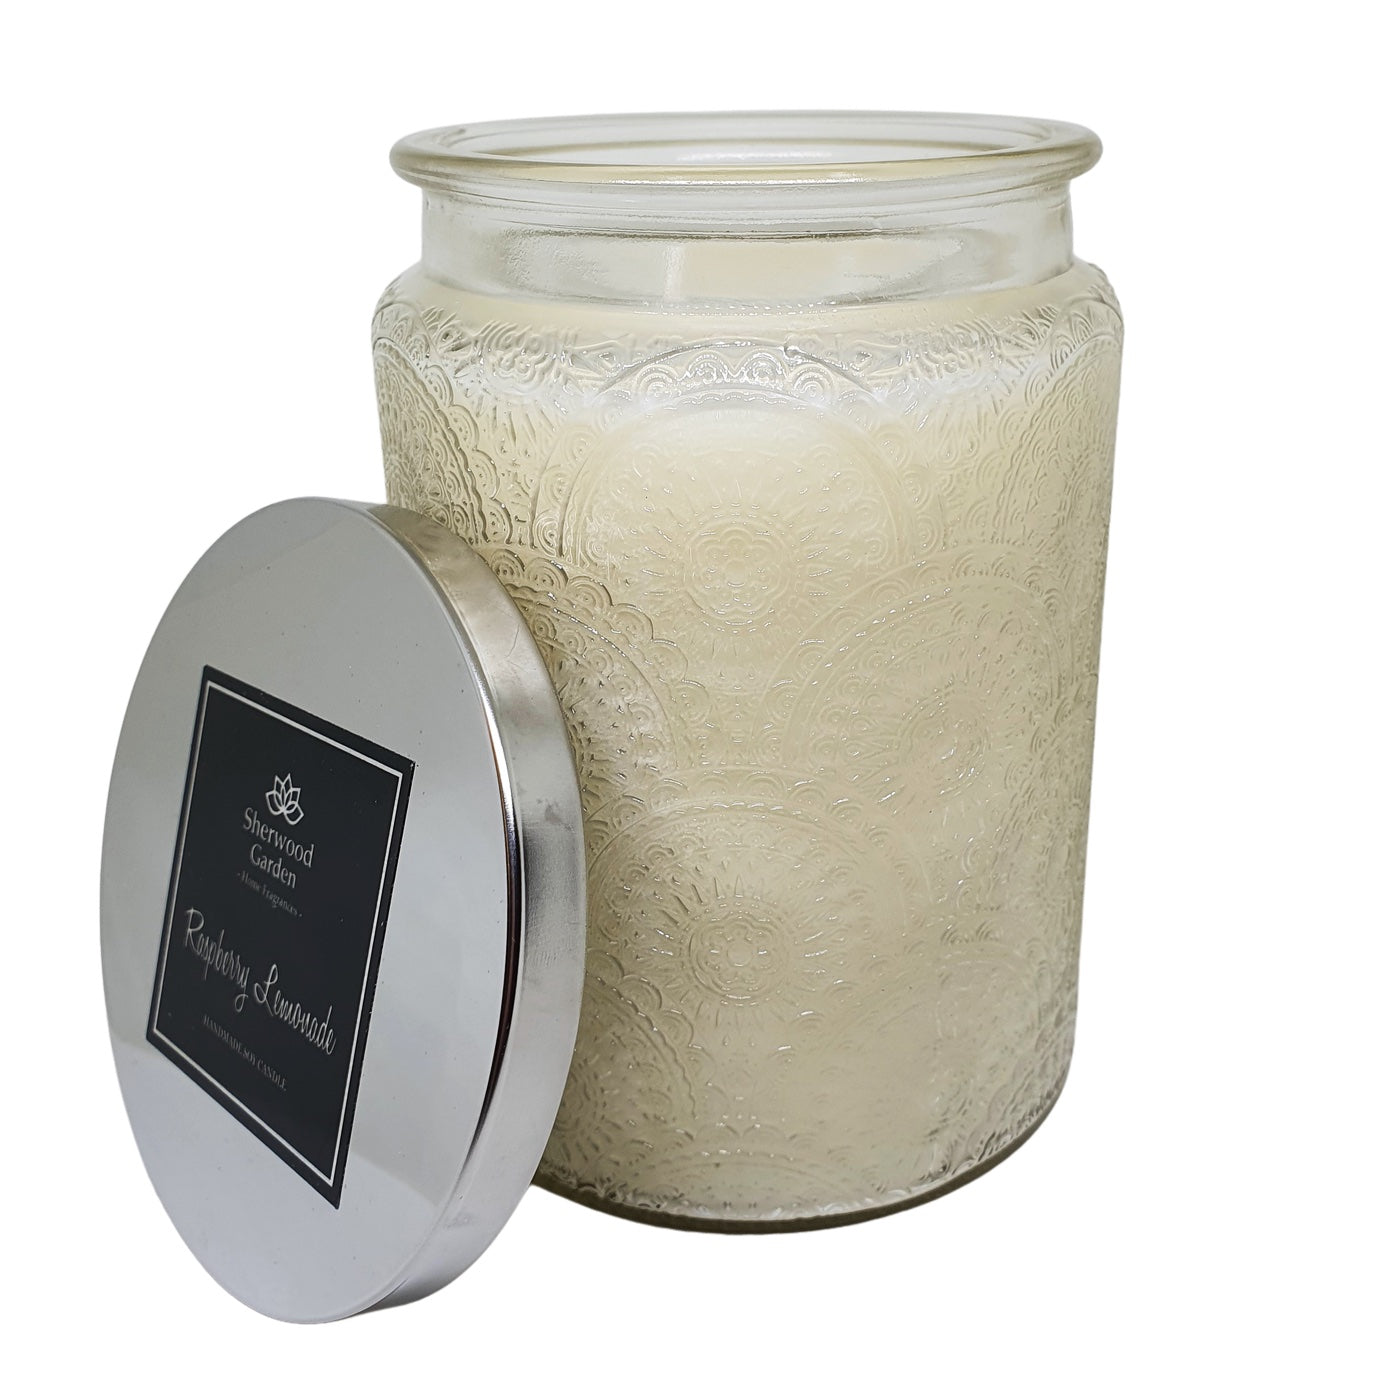 Spa Retreat Soy Candle 580g